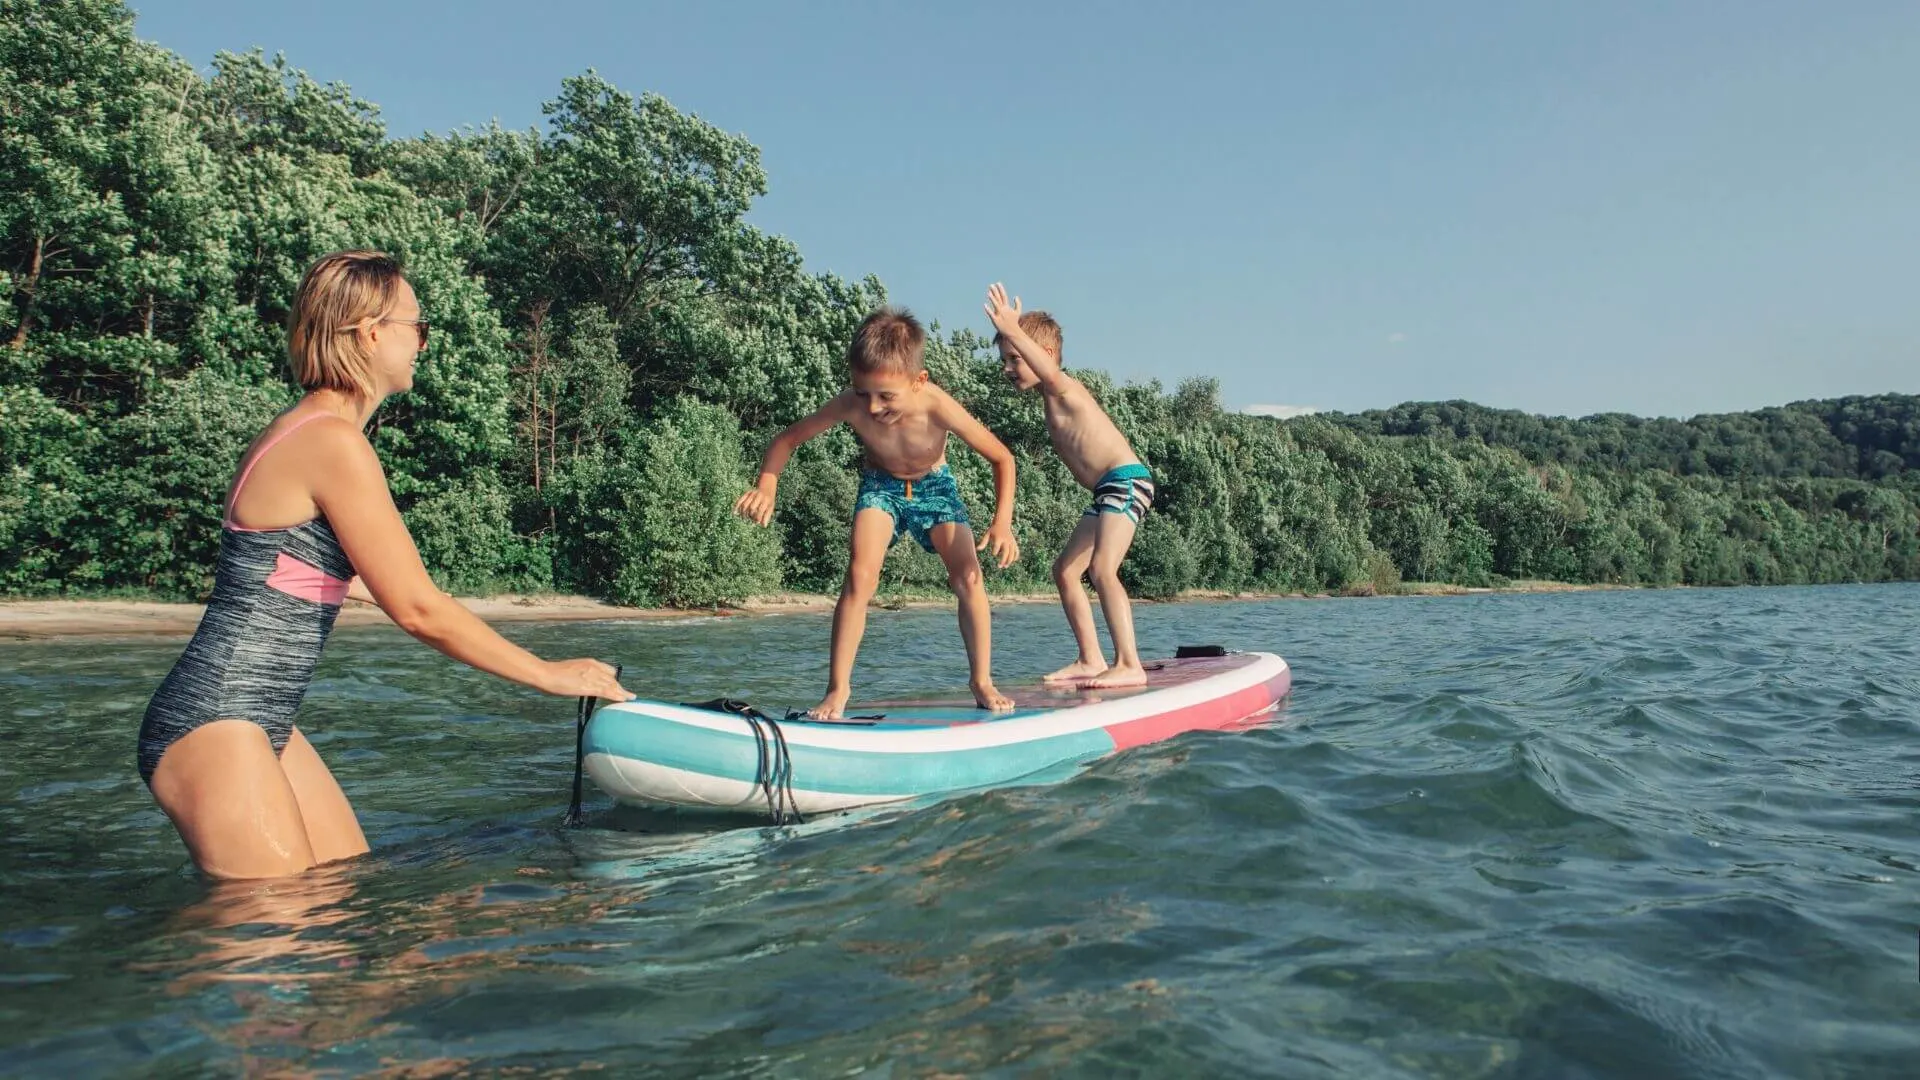 buying an inflatable stand up paddle board